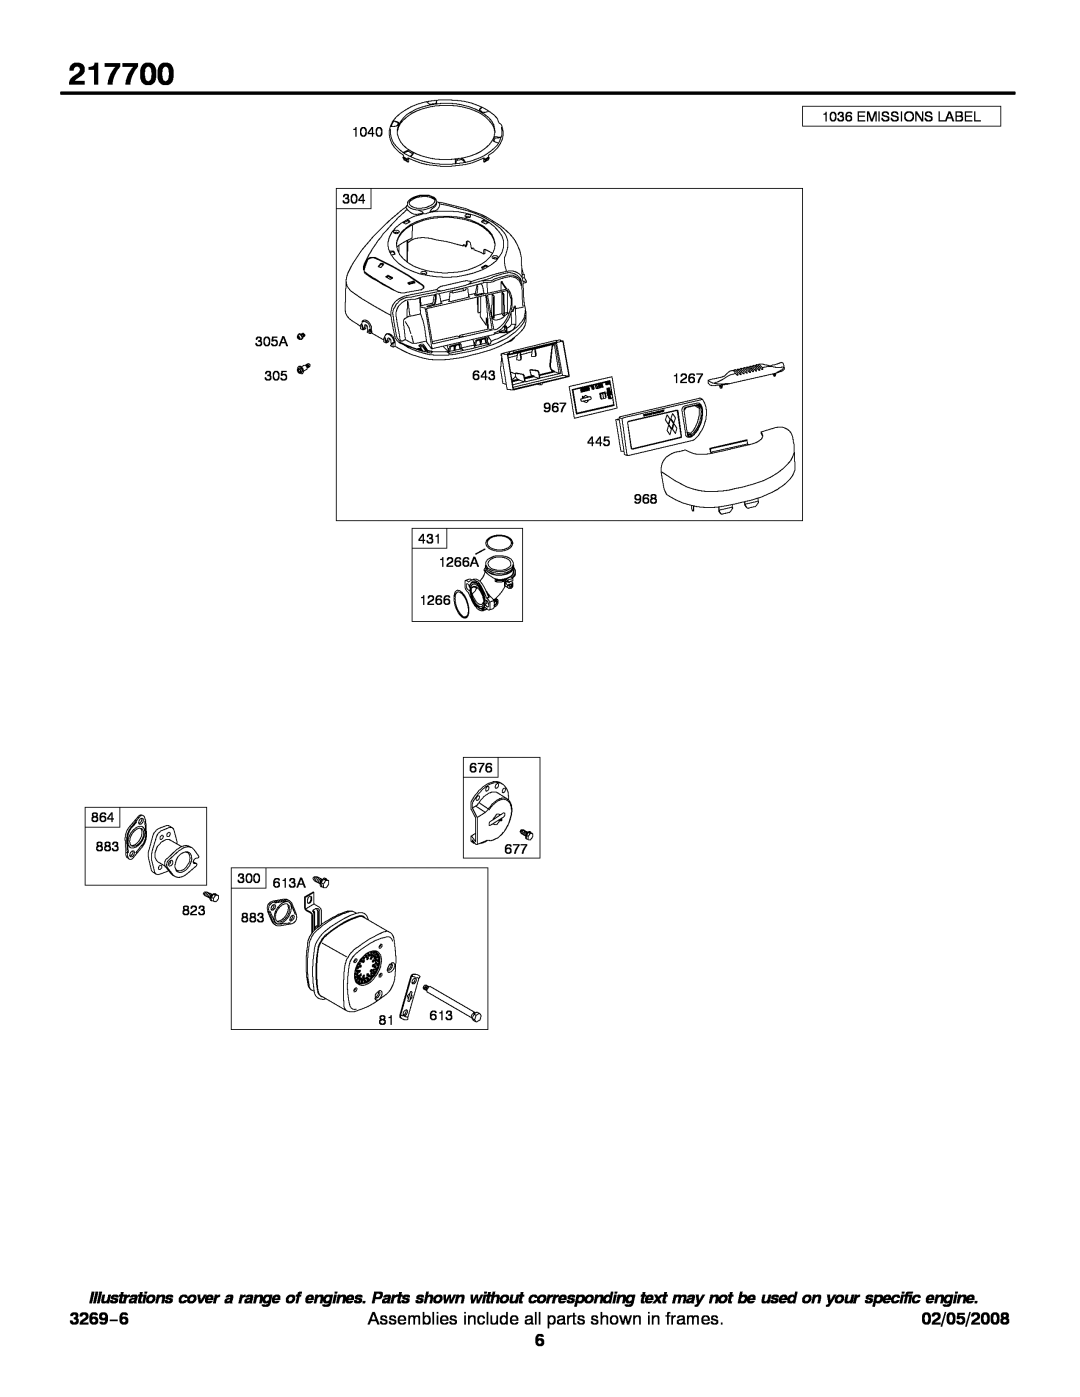 Briggs & Stratton 217700 service manual 3269−6, Assemblies include all parts shown in frames, 02/05/2008 